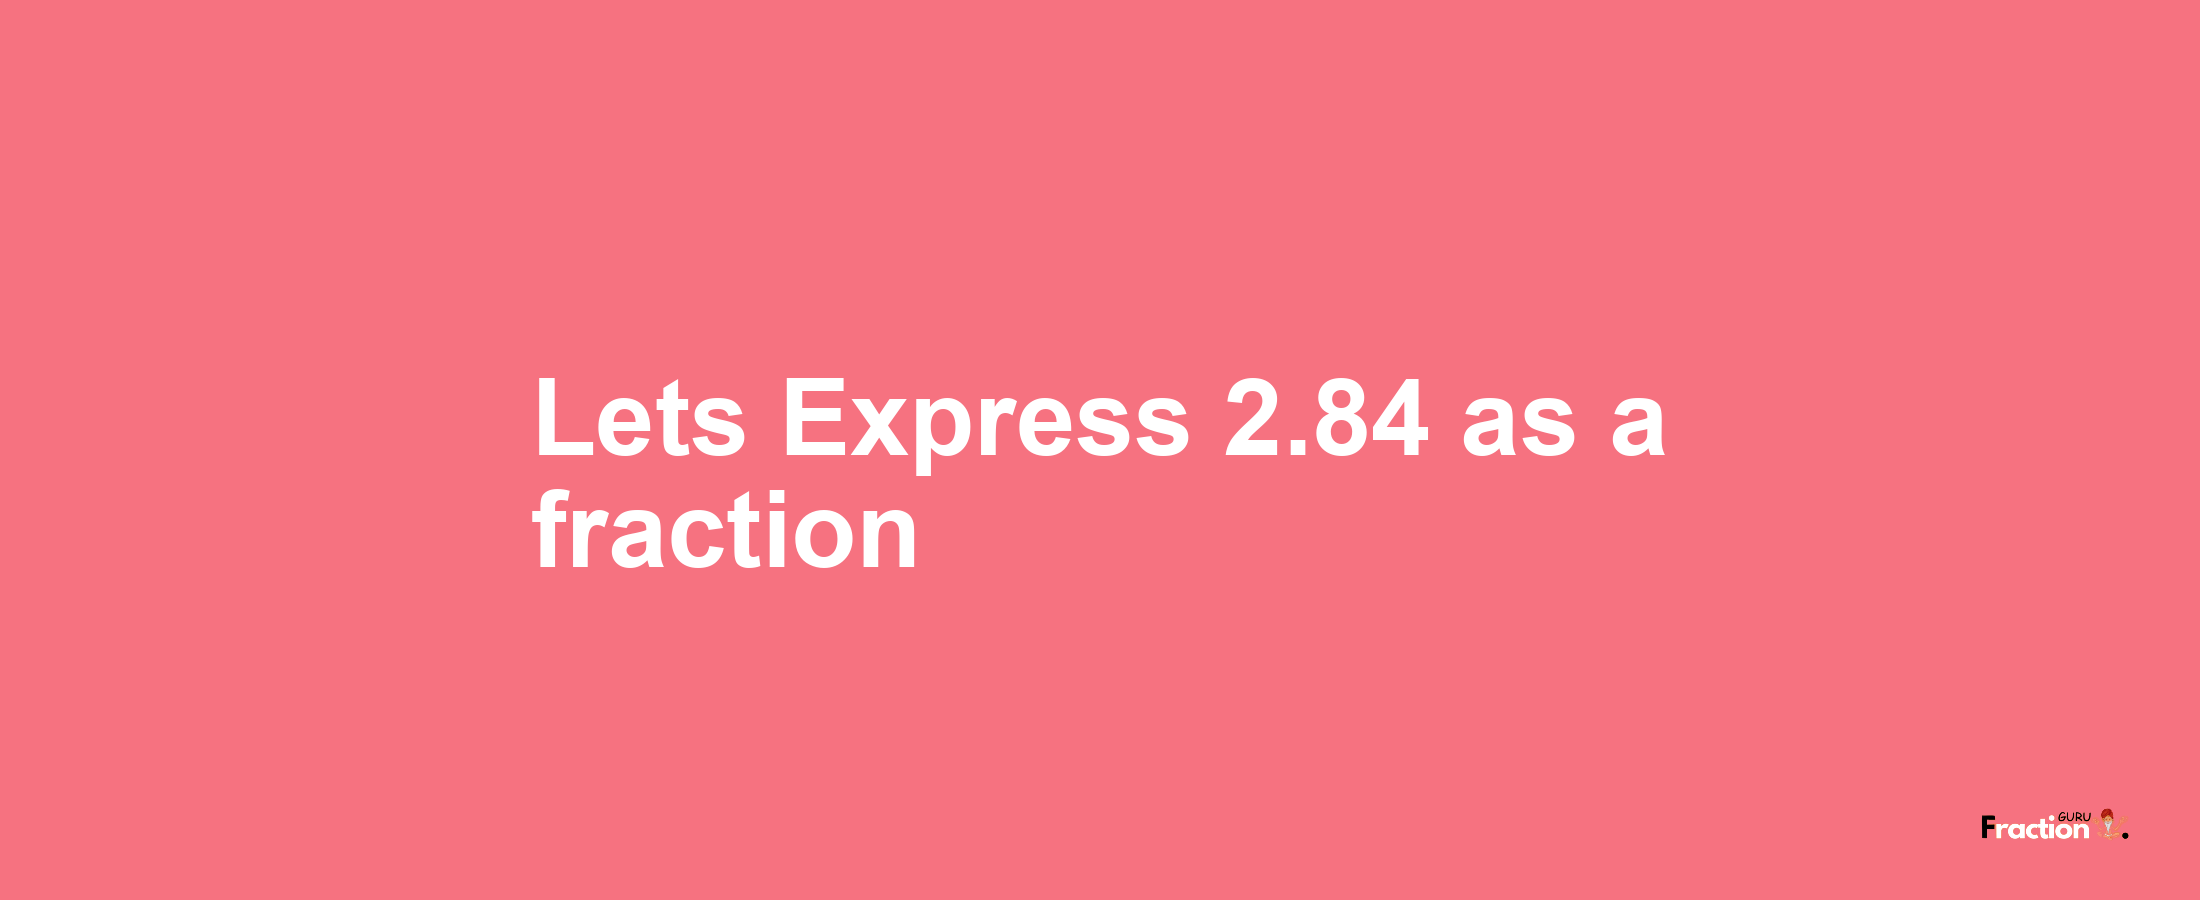 Lets Express 2.84 as afraction